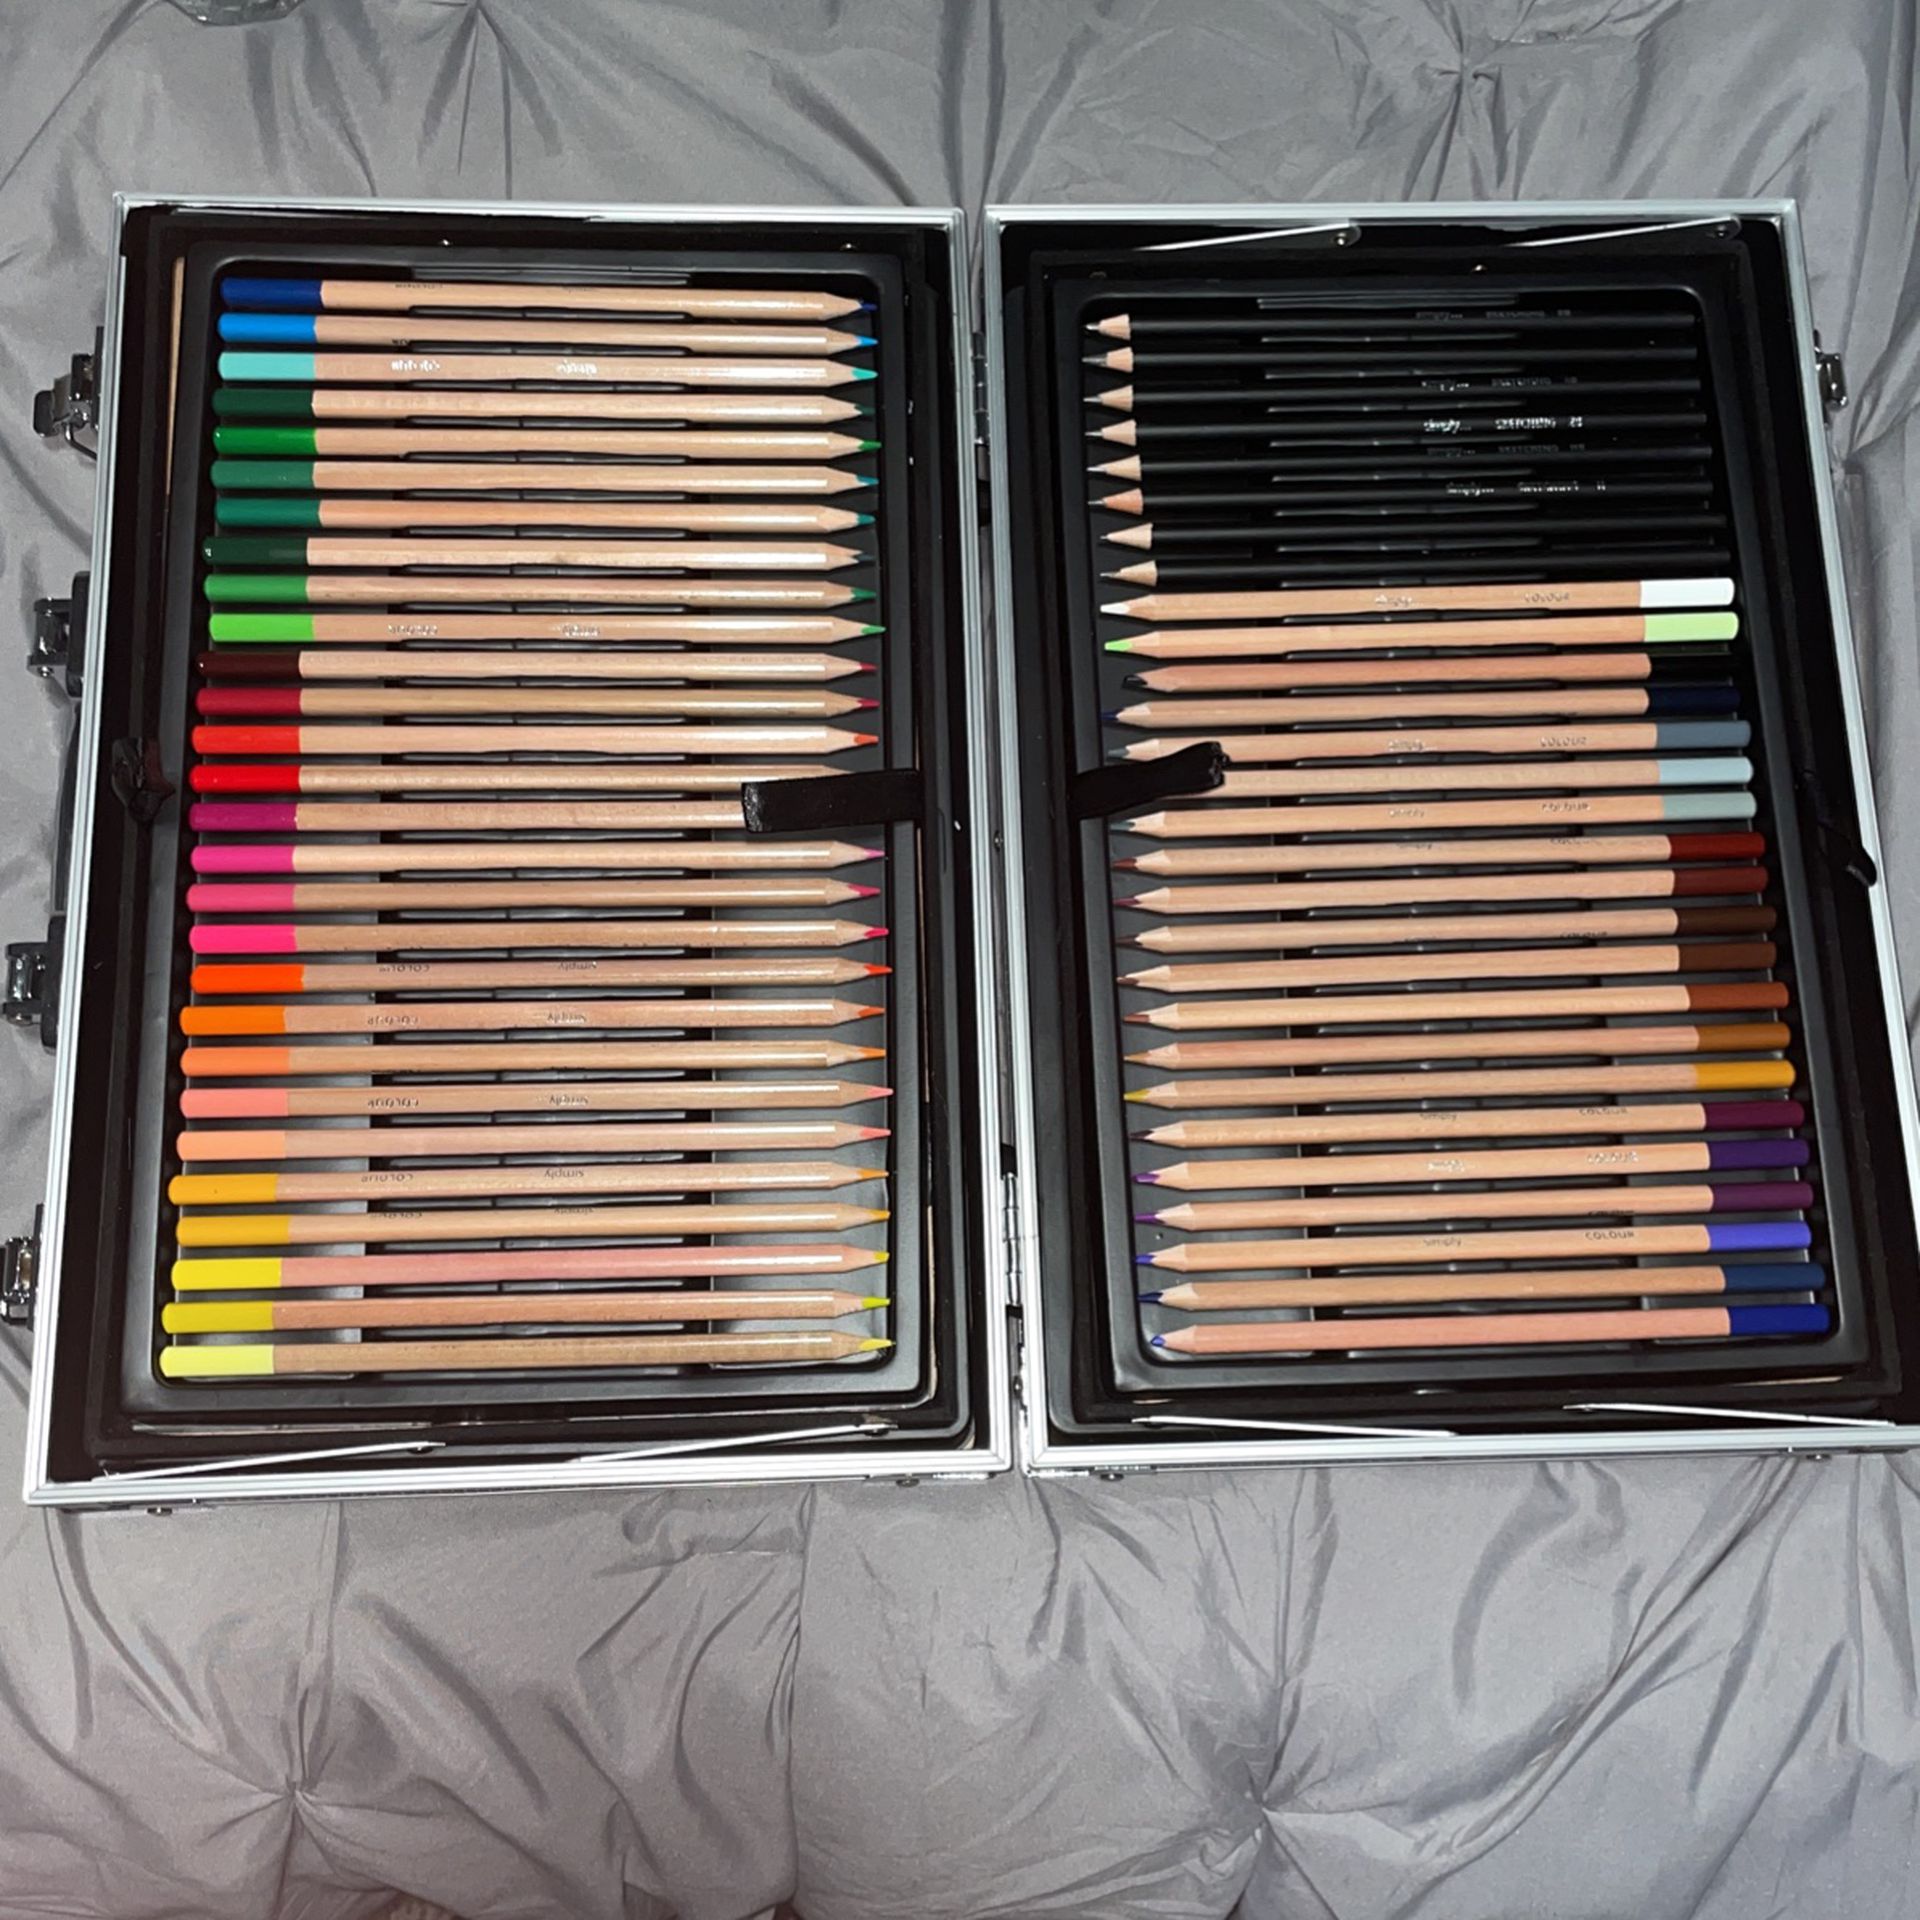 ART SET comes with case 